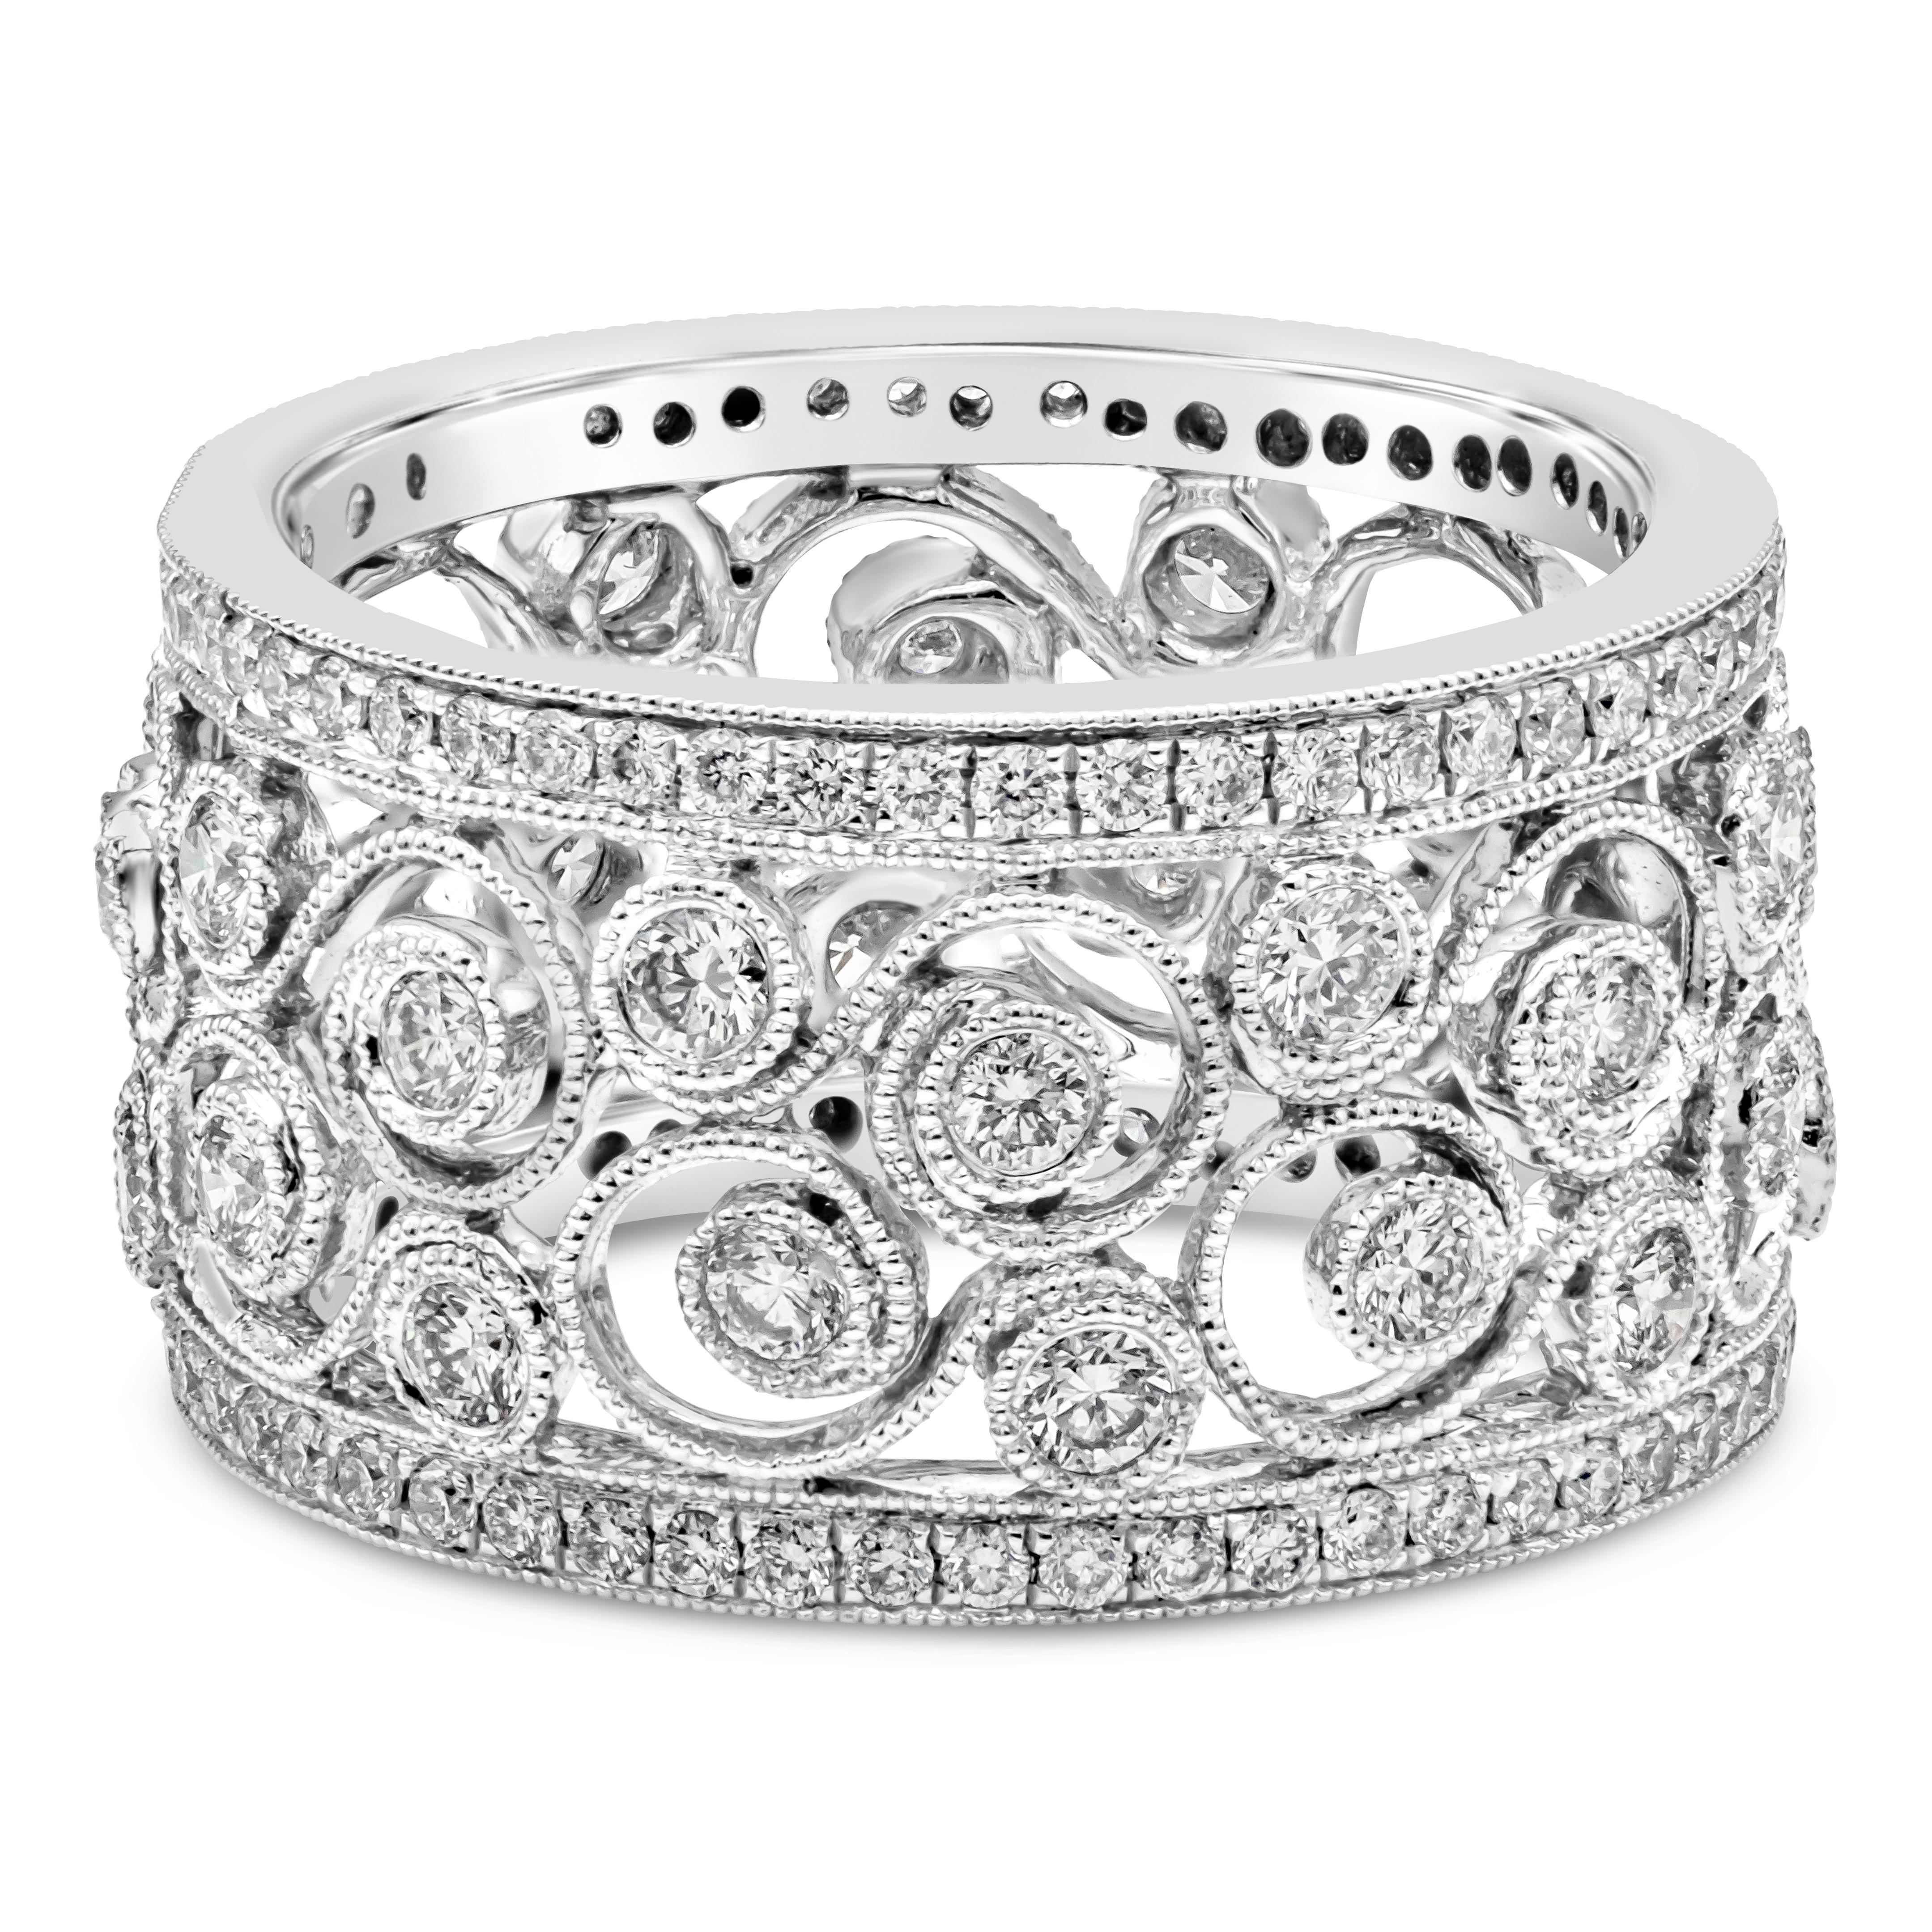 Featuring a unique and antique-looking design wedding band ring set with 136 brilliant round diamonds weighing 1.32 carats total. Finely Made in 18k white gold. Size 6US resizable upon request and 0.45 inches in width.

Style available in different